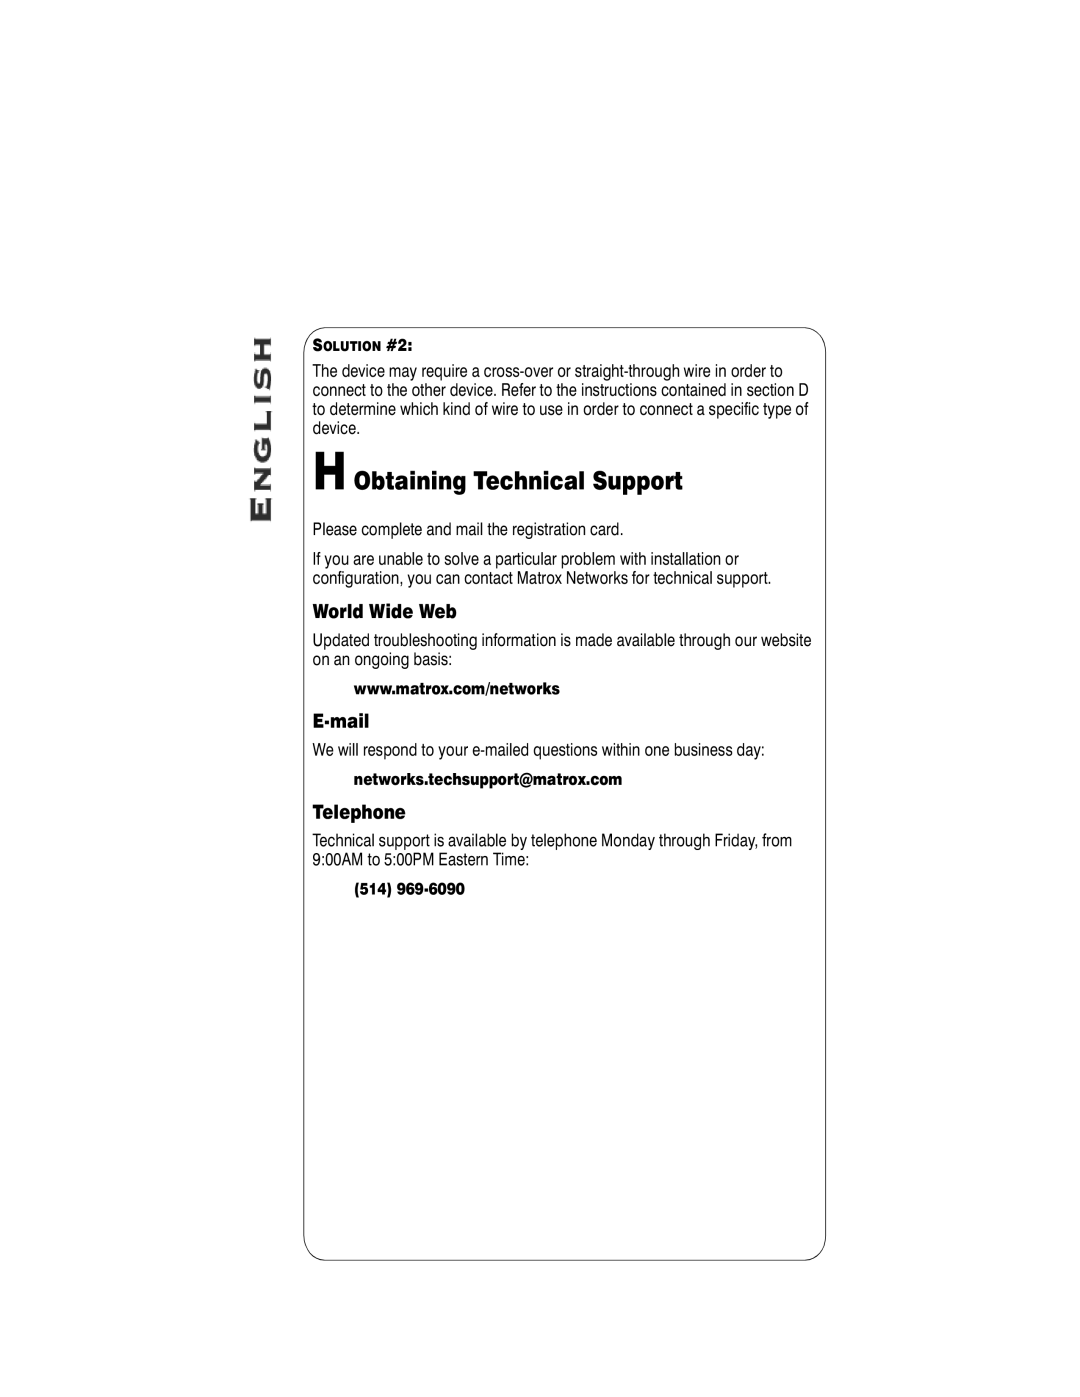 Matrox Electronic Systems 10574-MT-0102 manual H Obtaining Technical Support, World Wide Web, E-mail, Telephone 